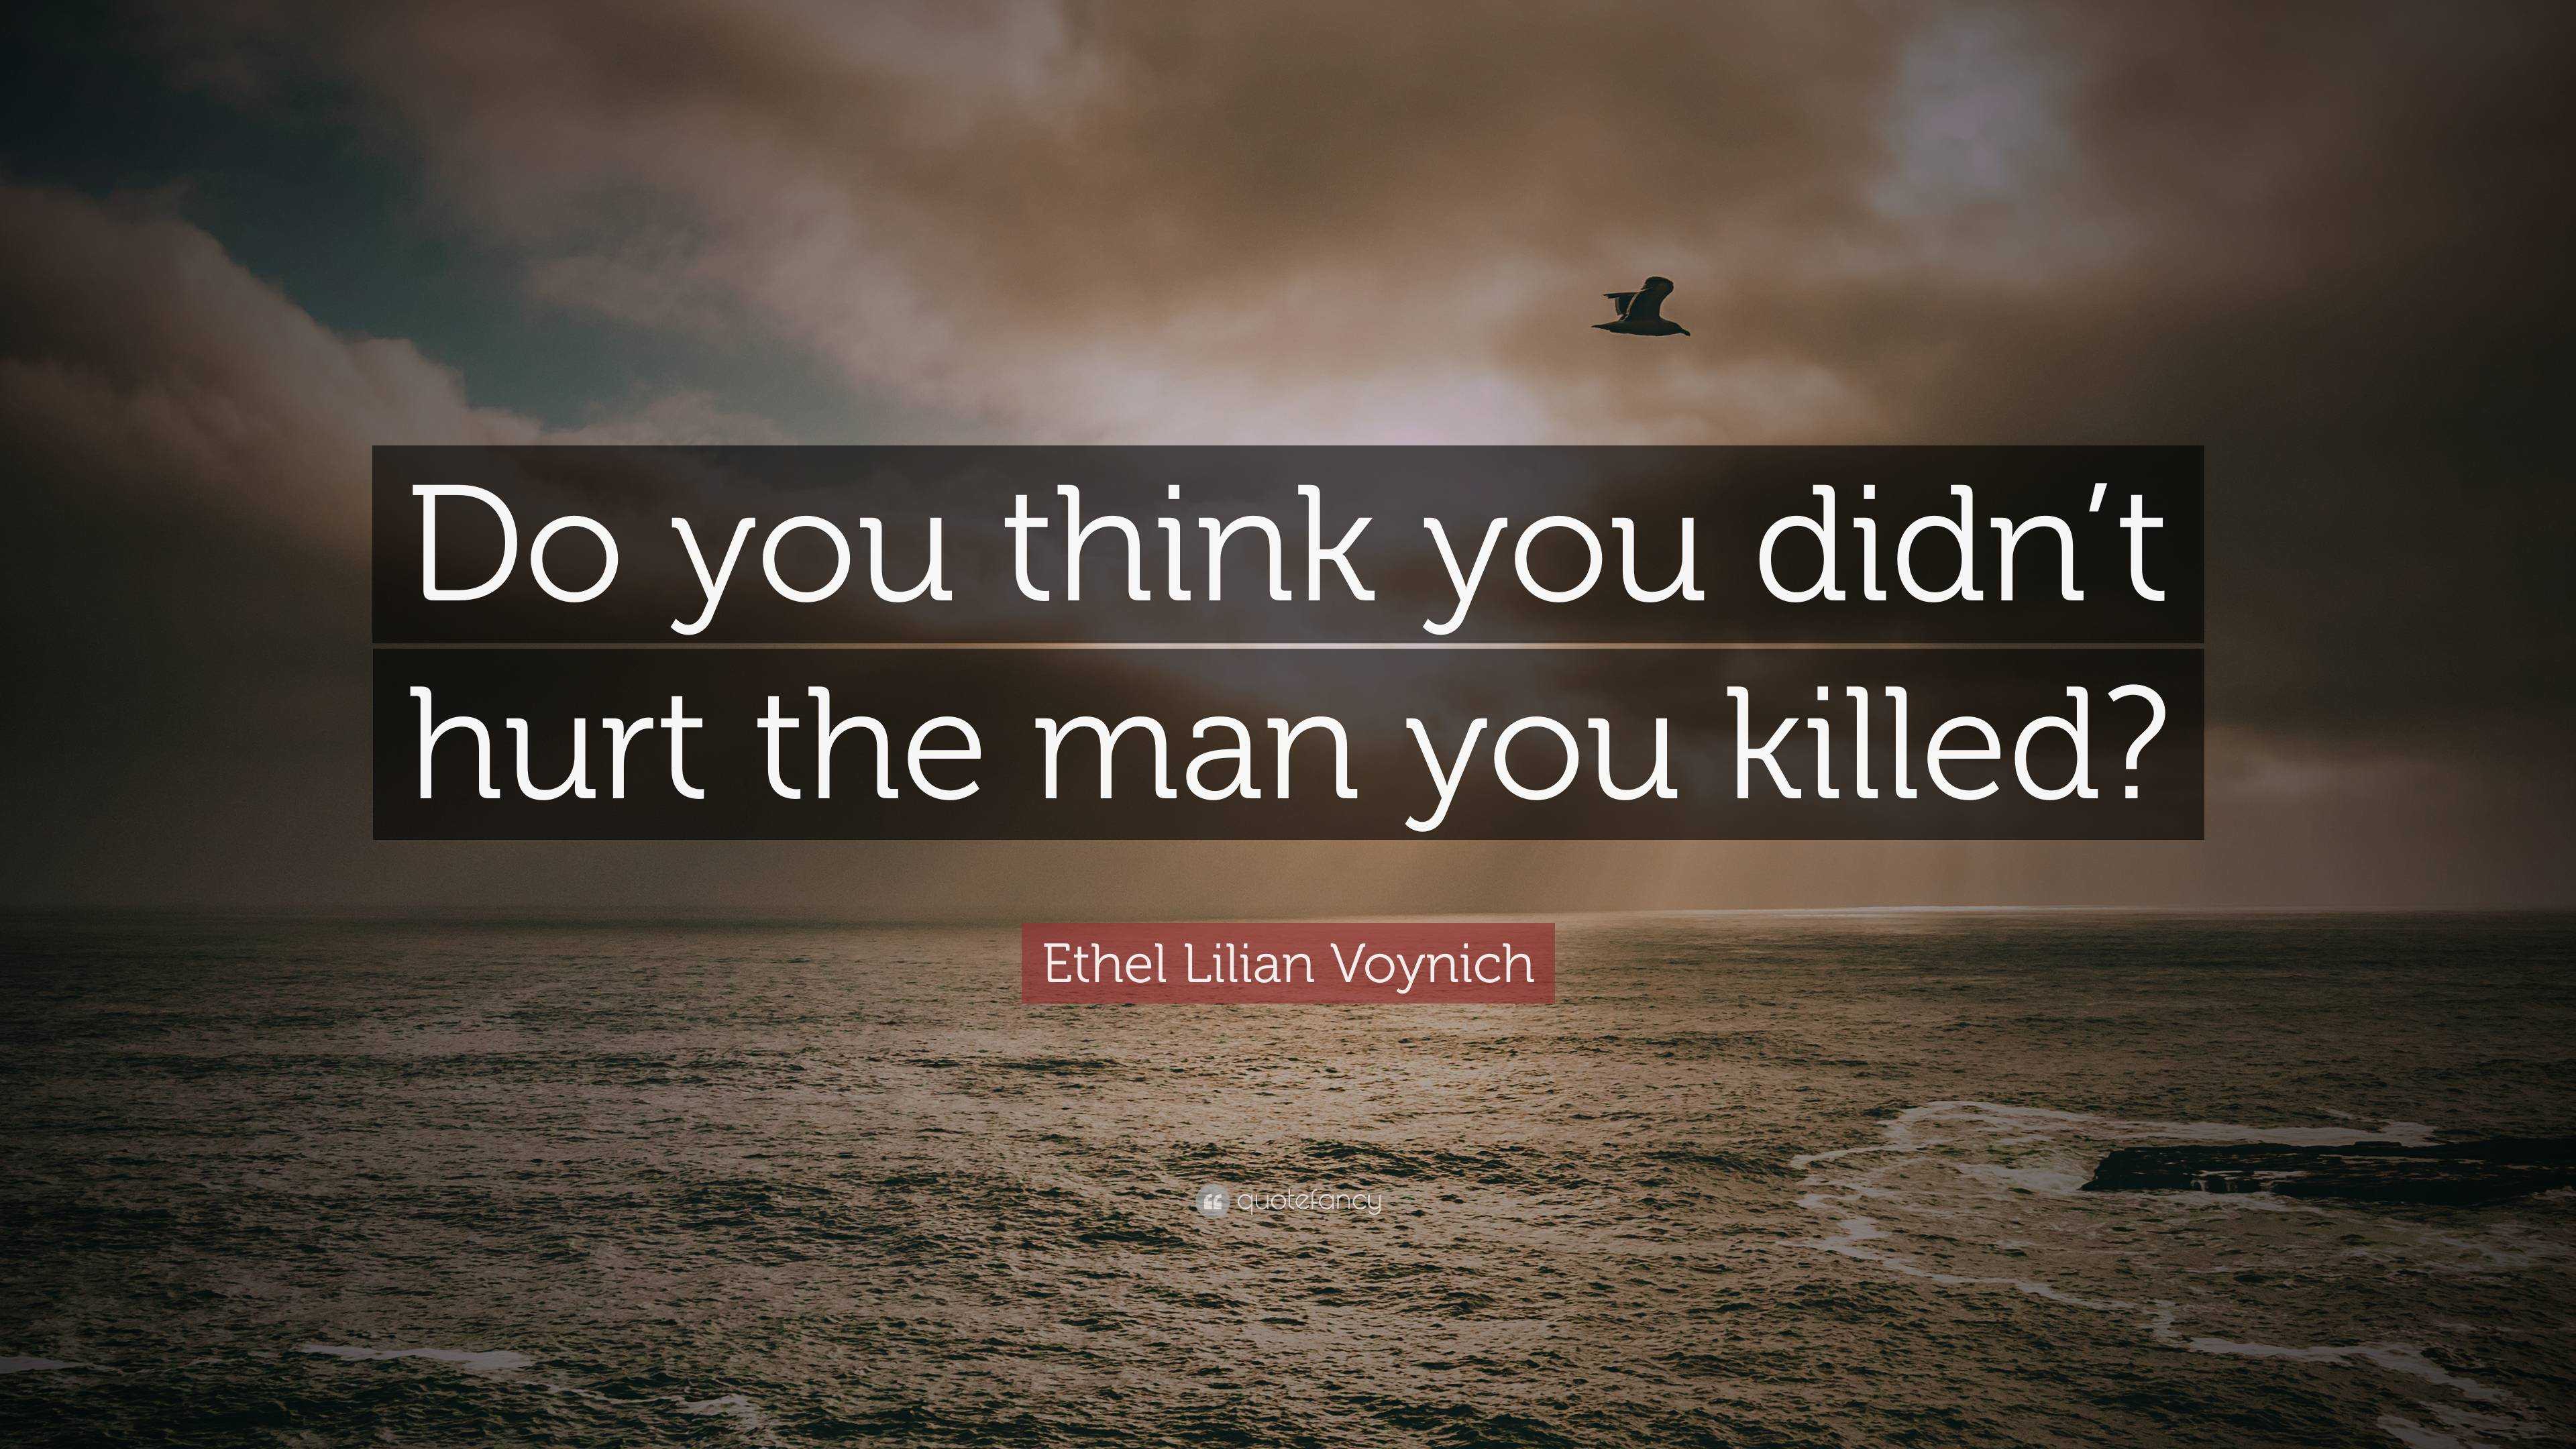 Ethel Lilian Voynich Quote: “Do you think you didn’t hurt the man you ...